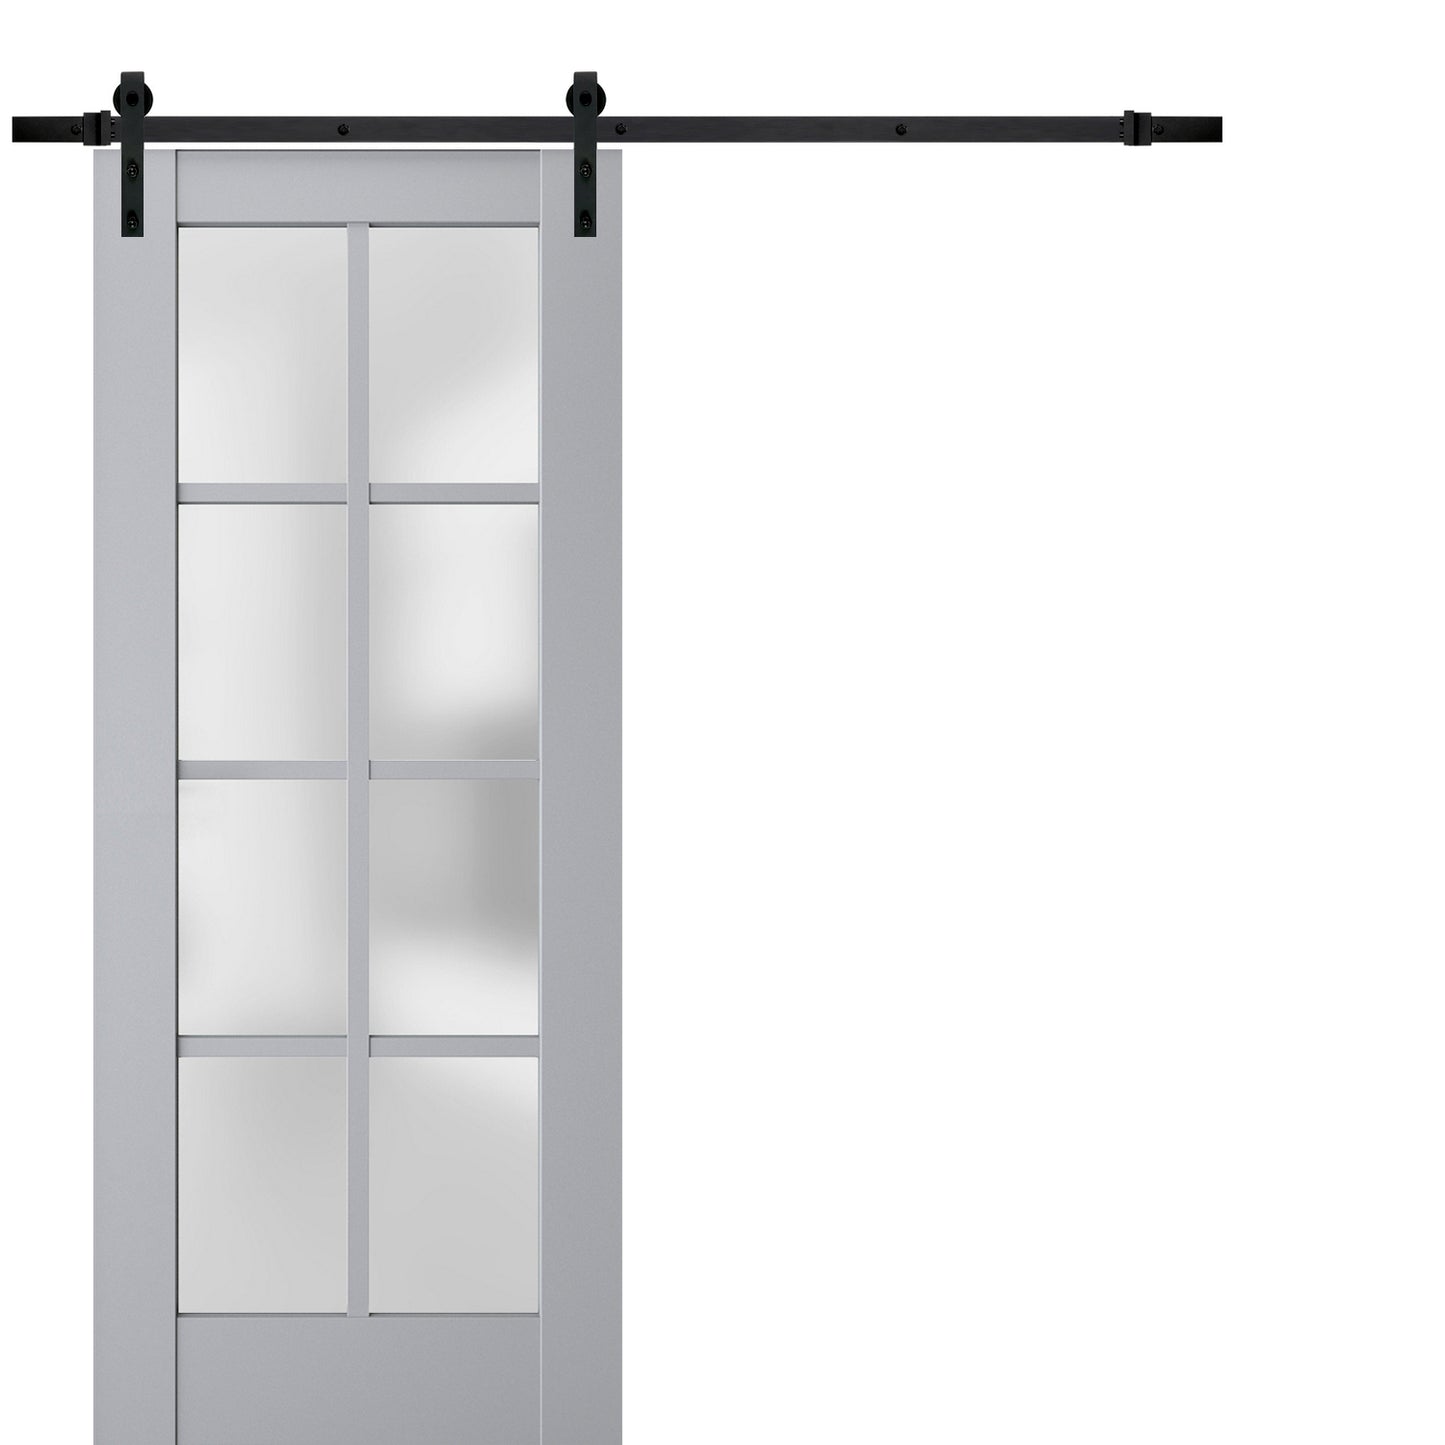 Veregio 7412 Matte Grey Barn Door with Frosted Glass and Black Rail